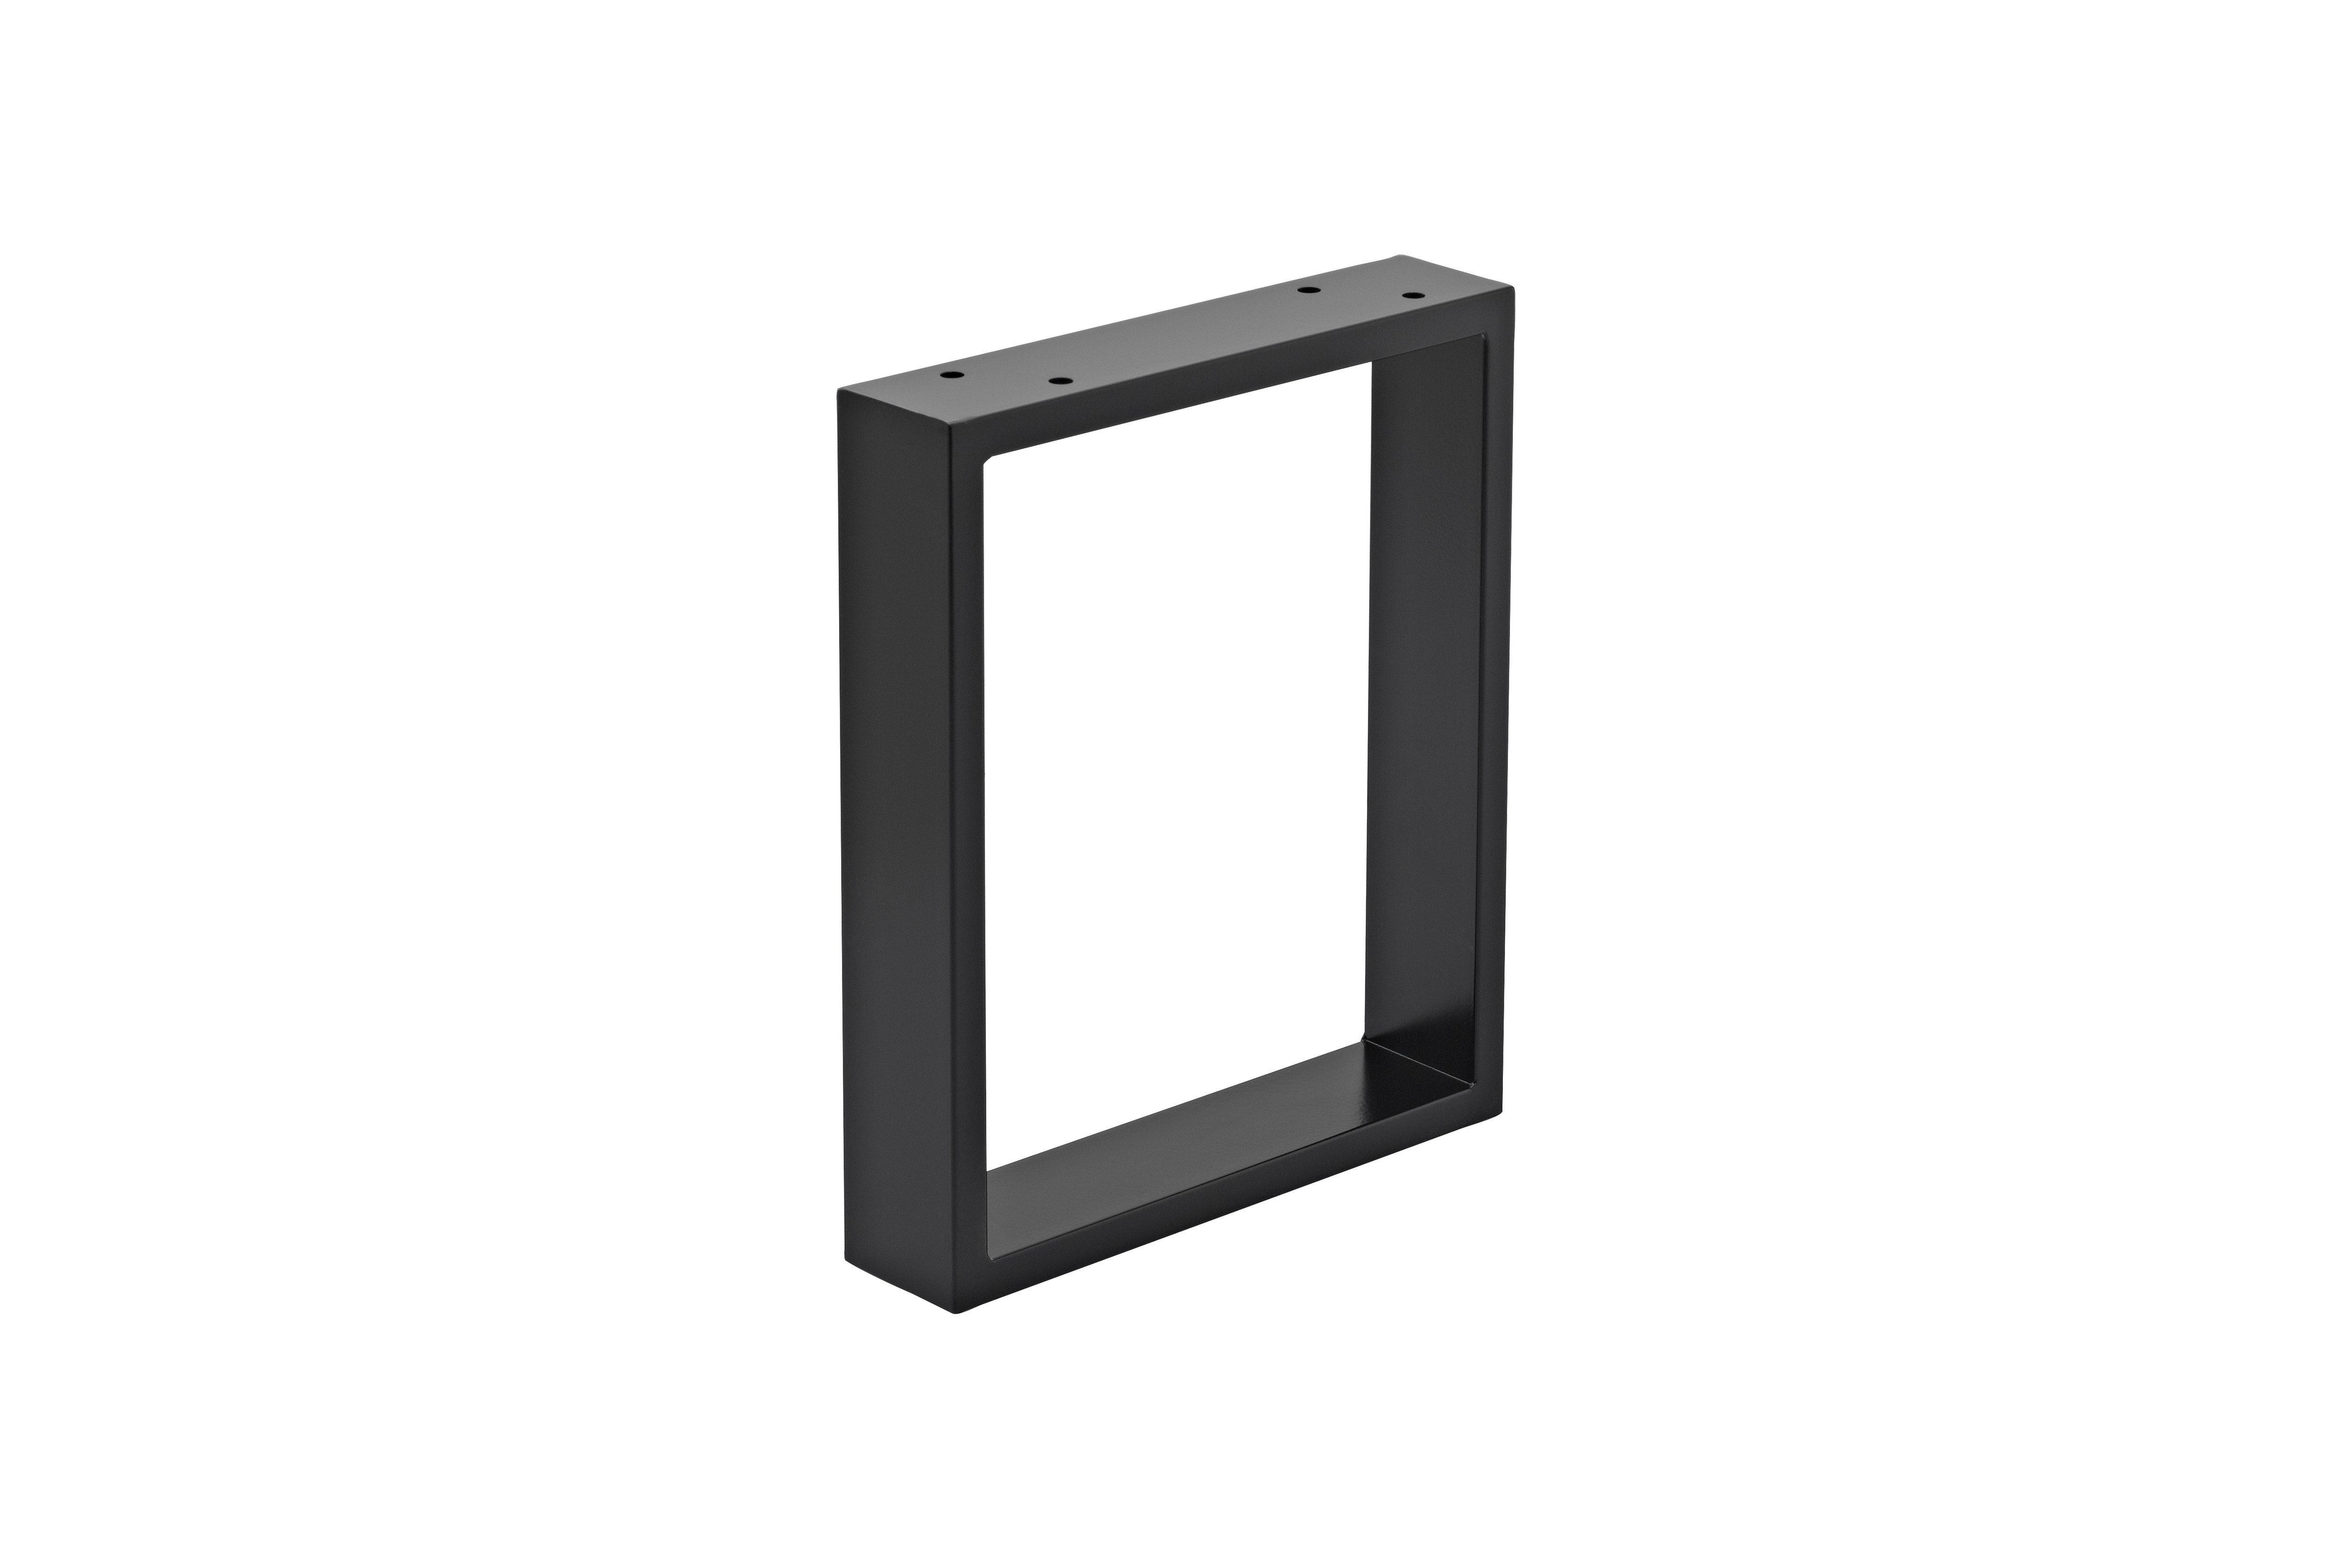 Bankgestell CHASSIS (2 St.) 350x422x80 mm schwarz